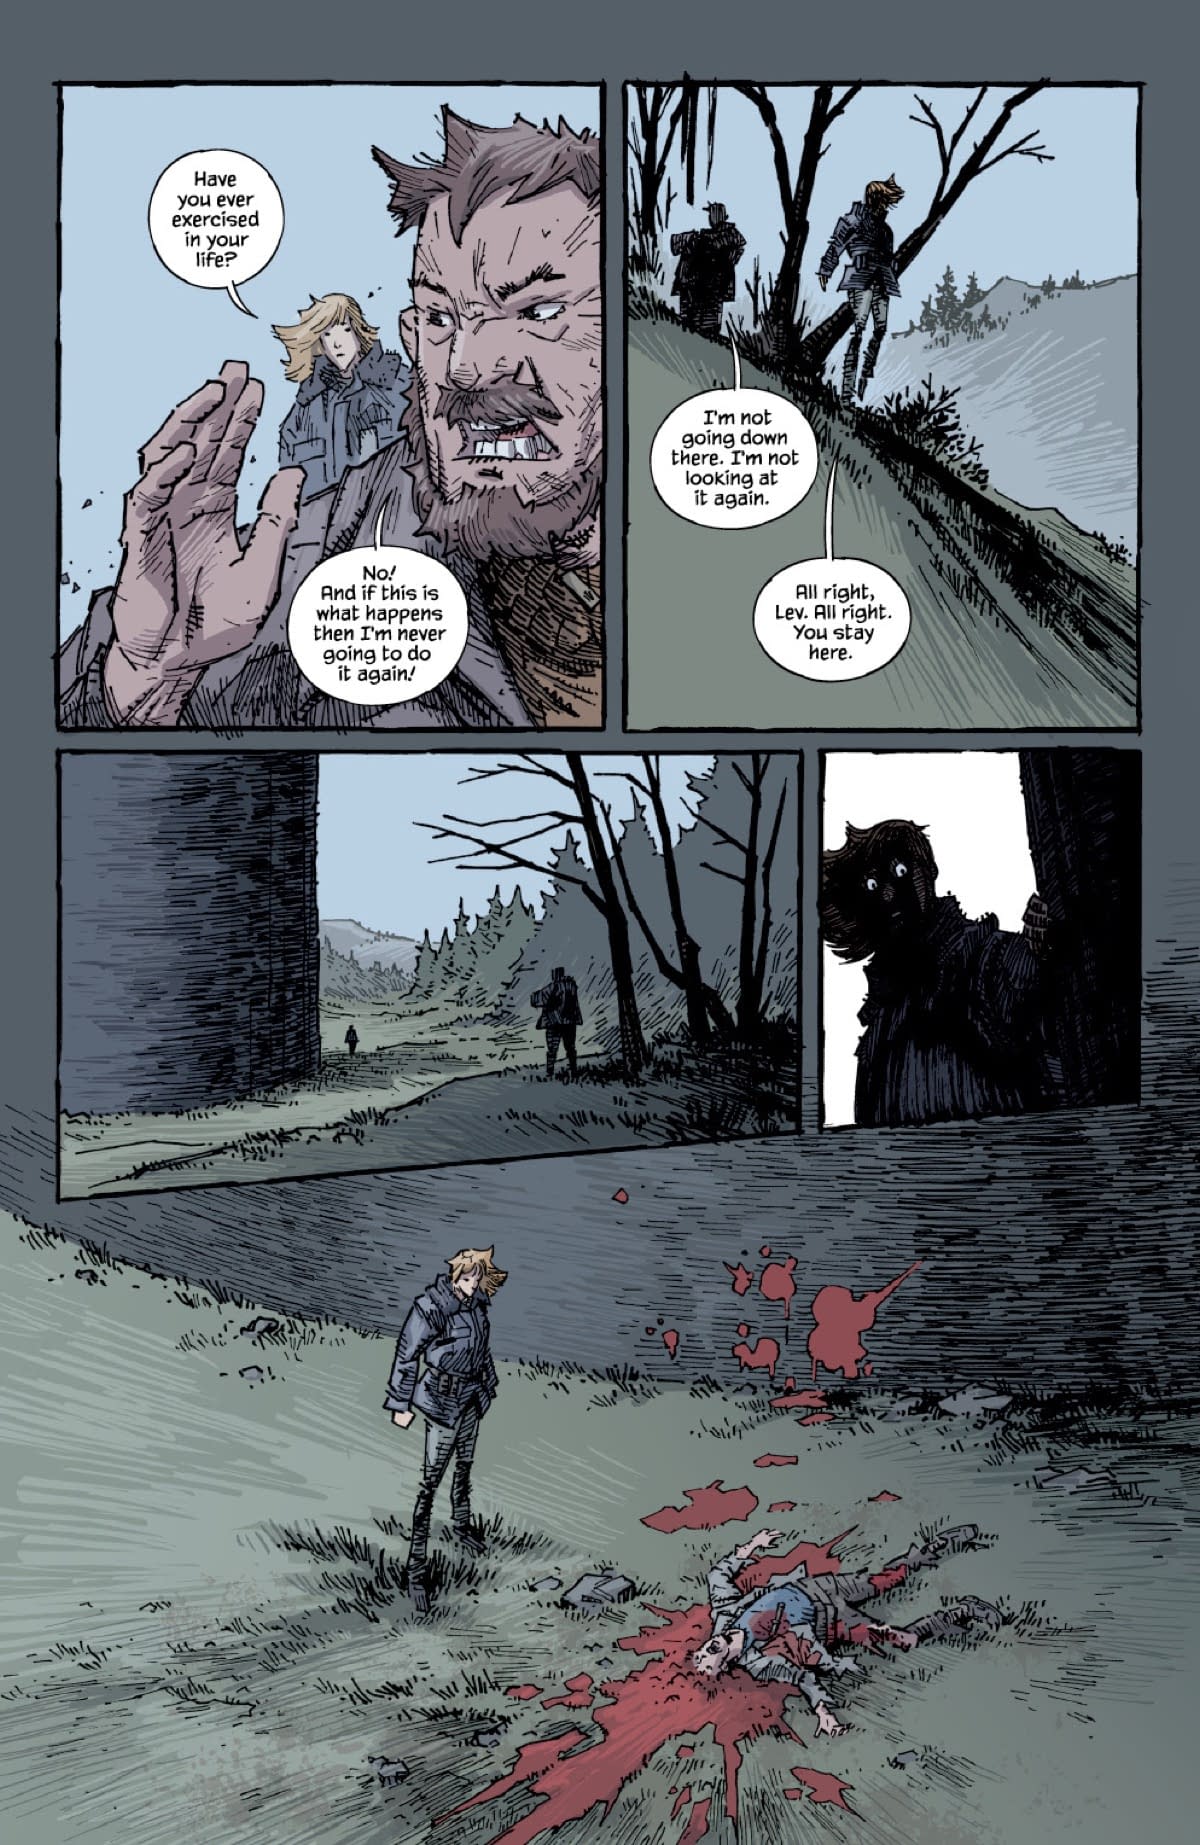 5 Pages From Warren Ellis and Jason Howard's Trees: Three Fates #1